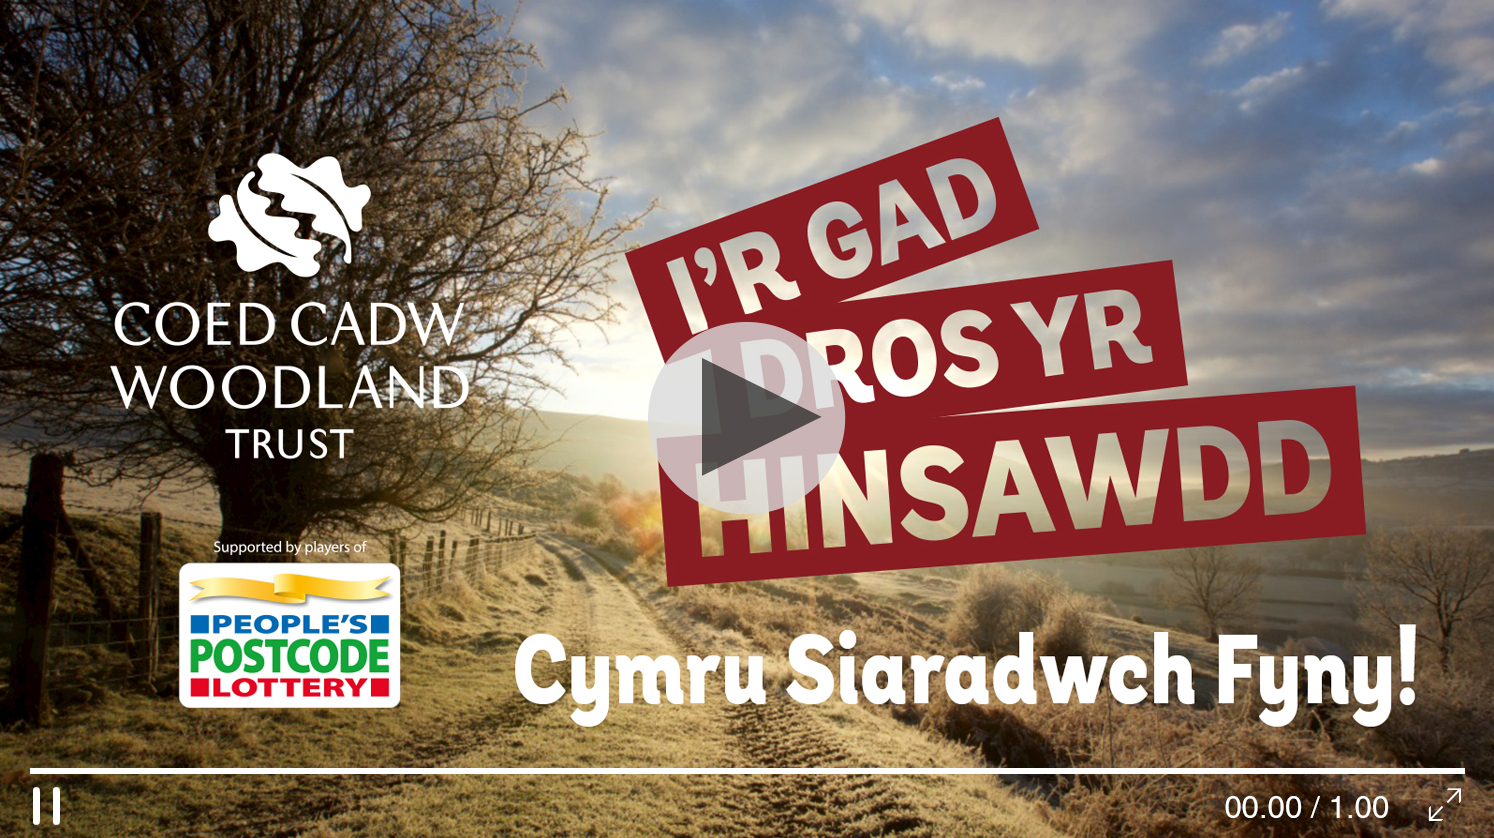 Creating social media video for Coed Cadw / the Woodland Trust